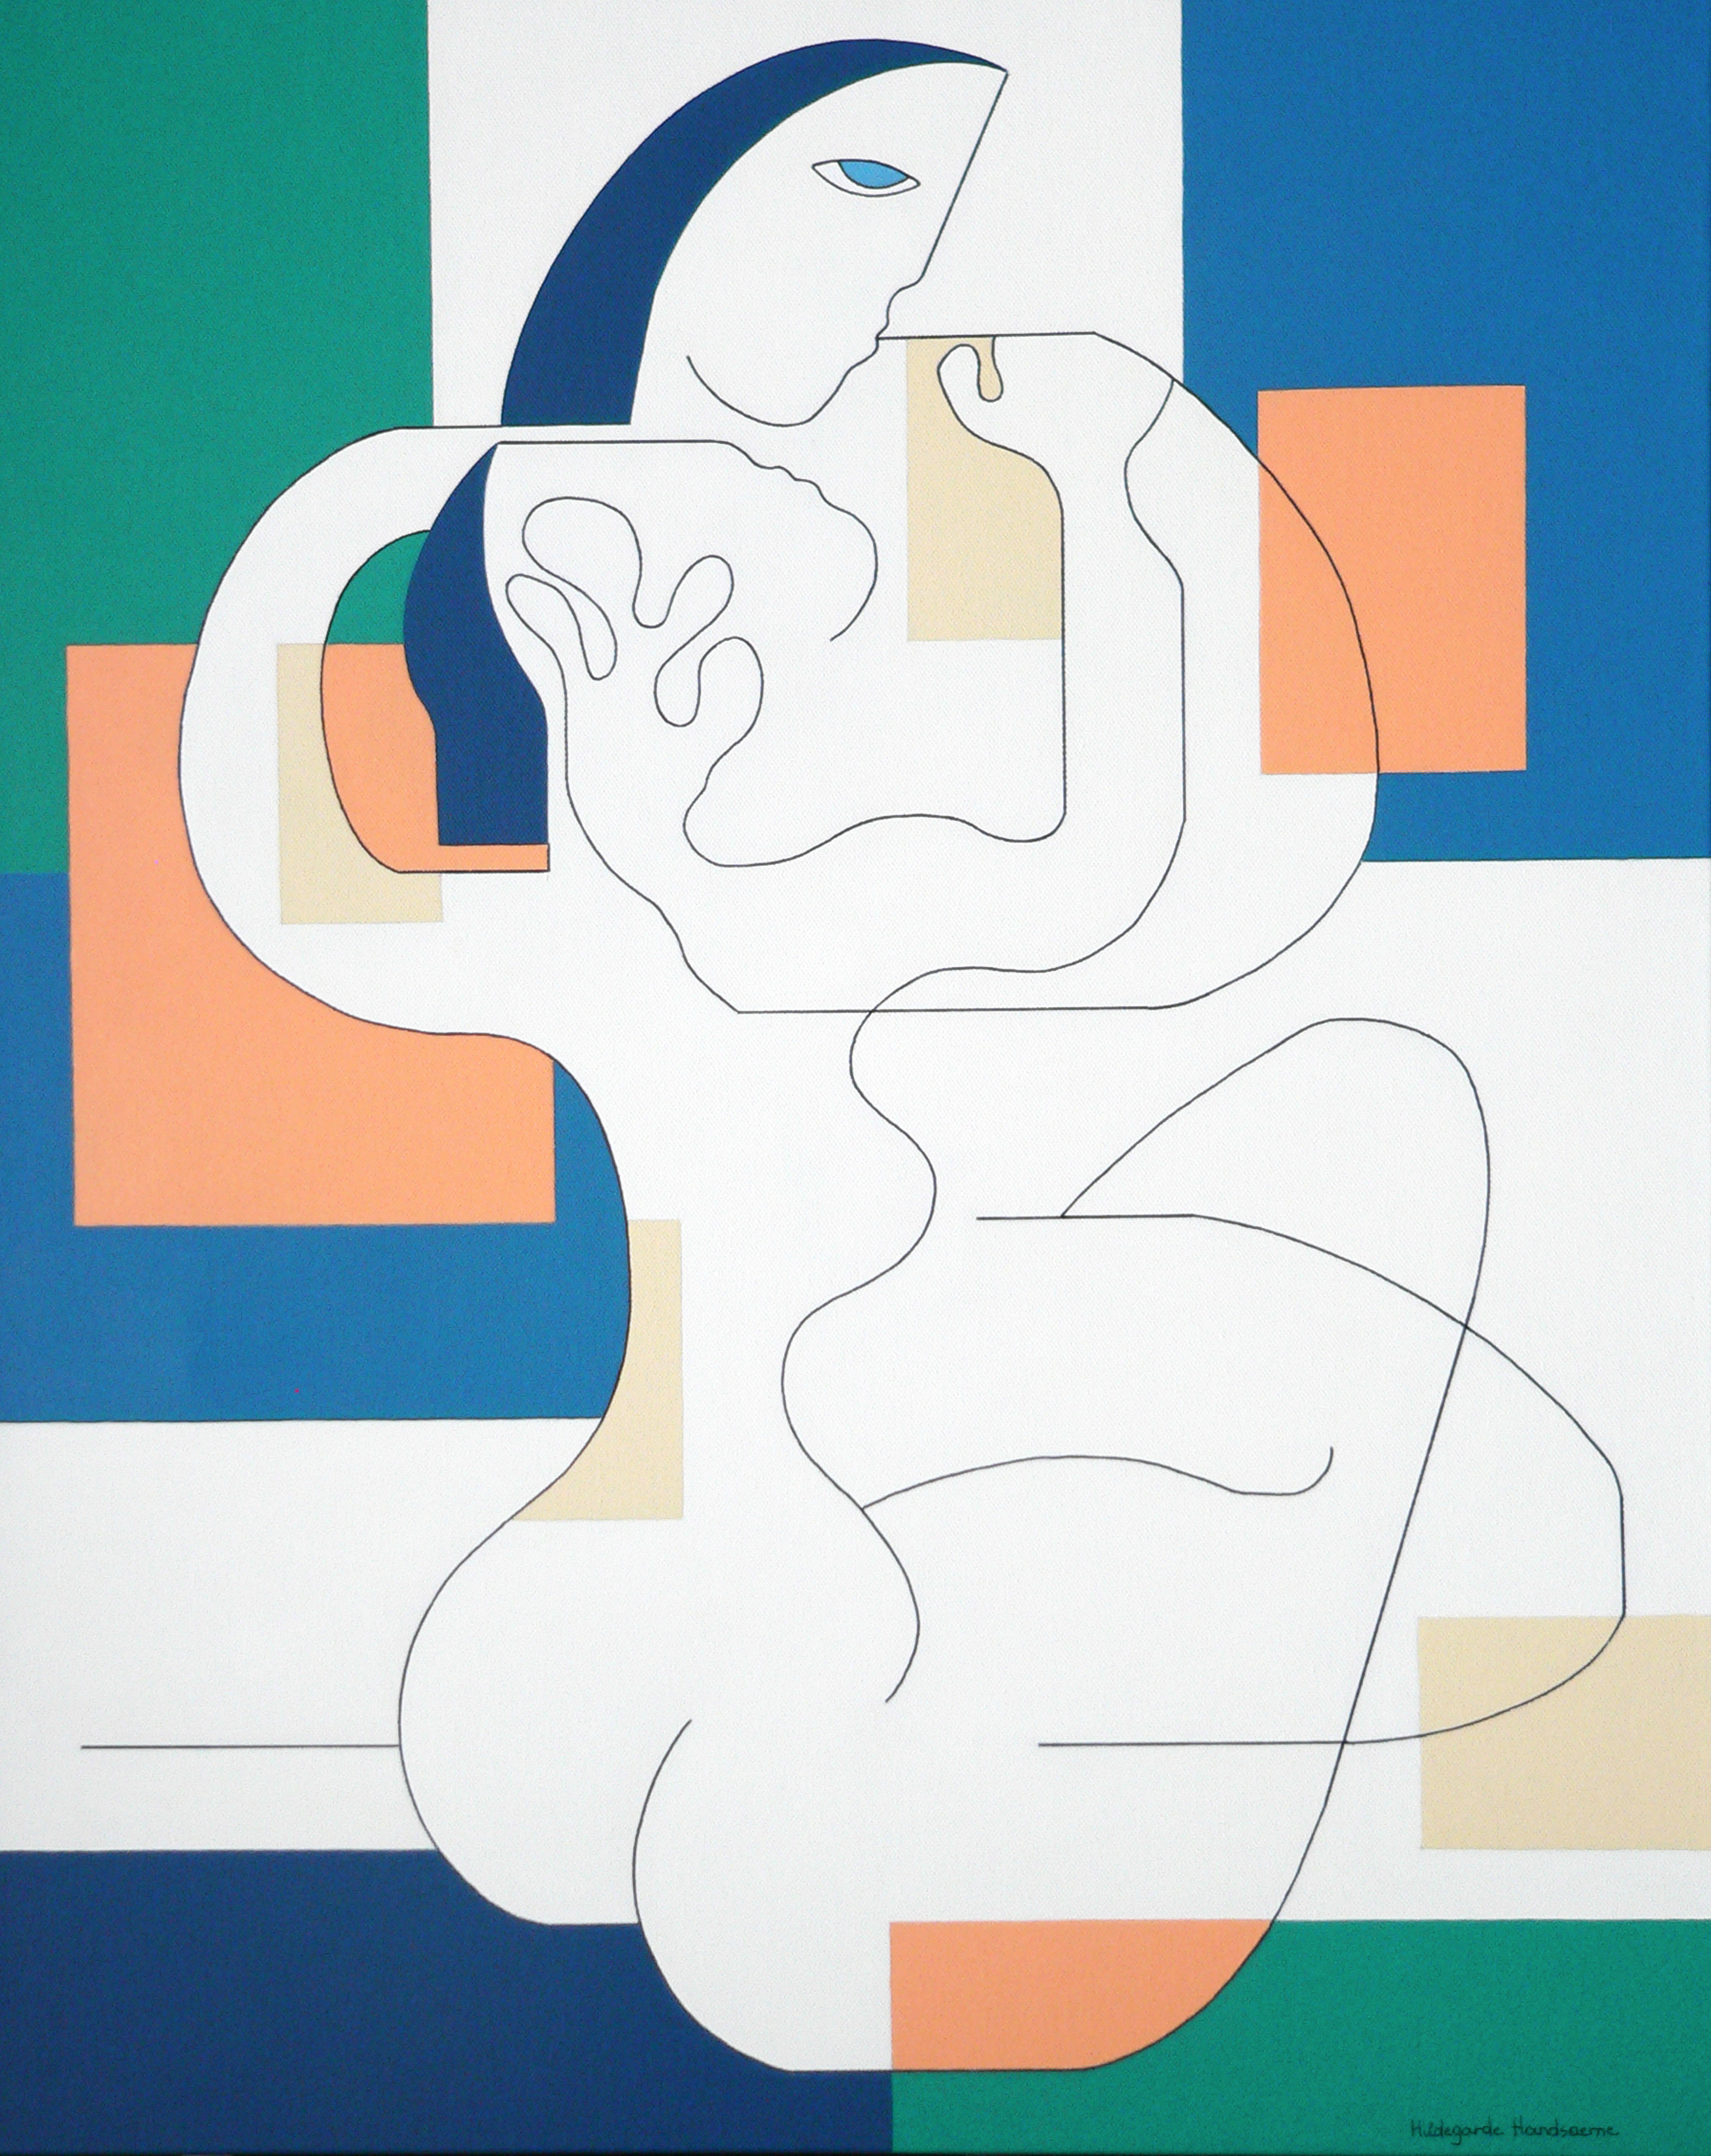 Sans Frontières, painting, acrylic on canvas - Painting by Hildegarde Handsaeme